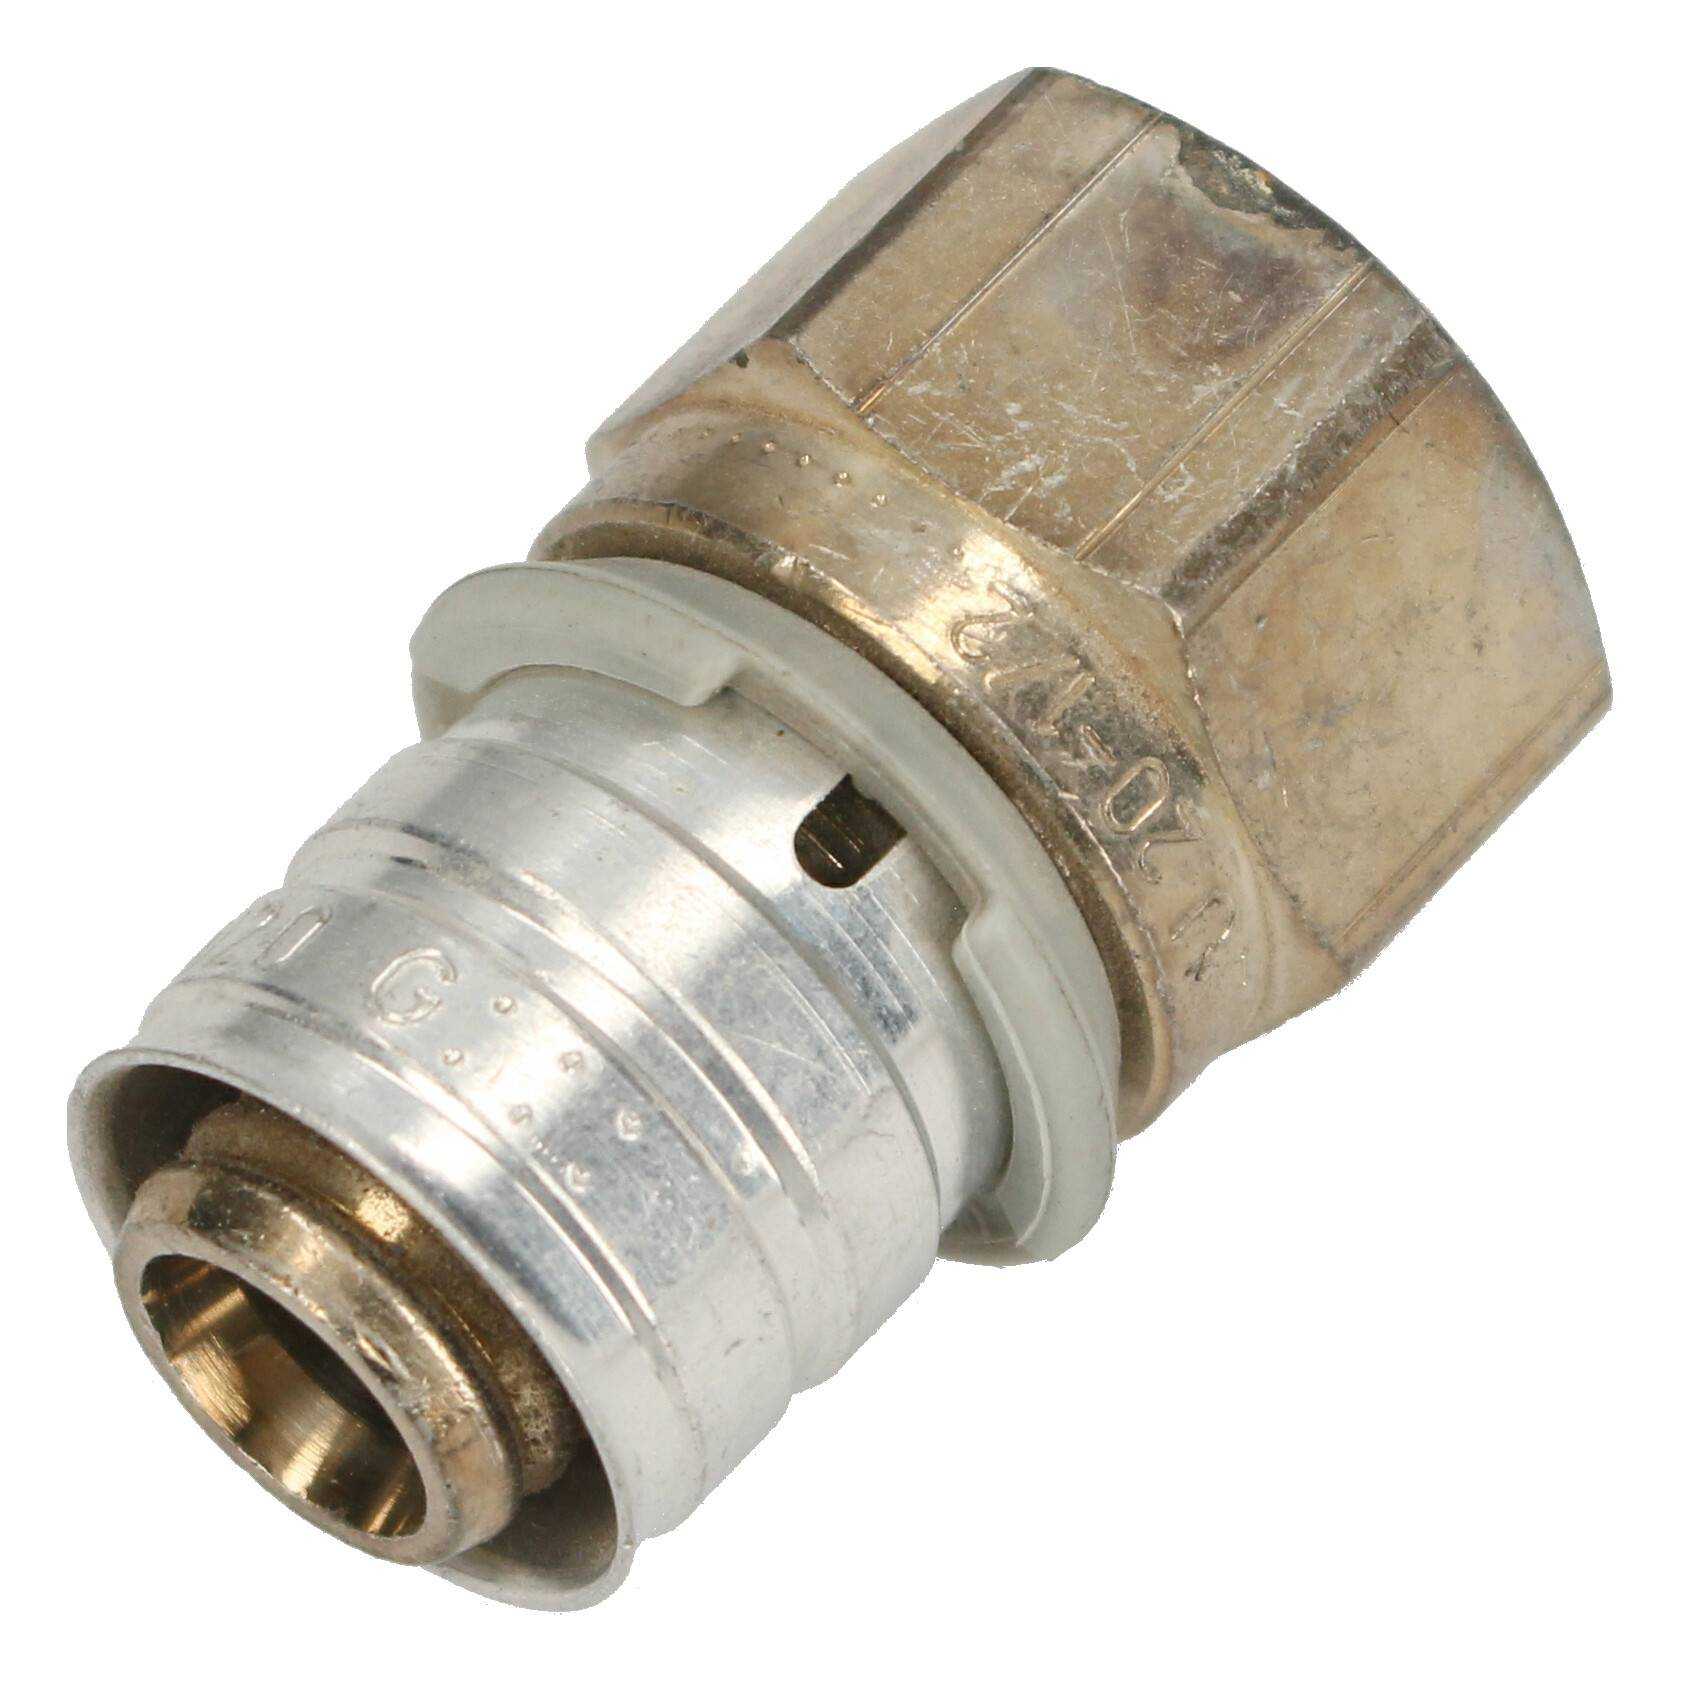 FEMALE THREADED PRESSED FITTING 20mm-1/2" - Image 1